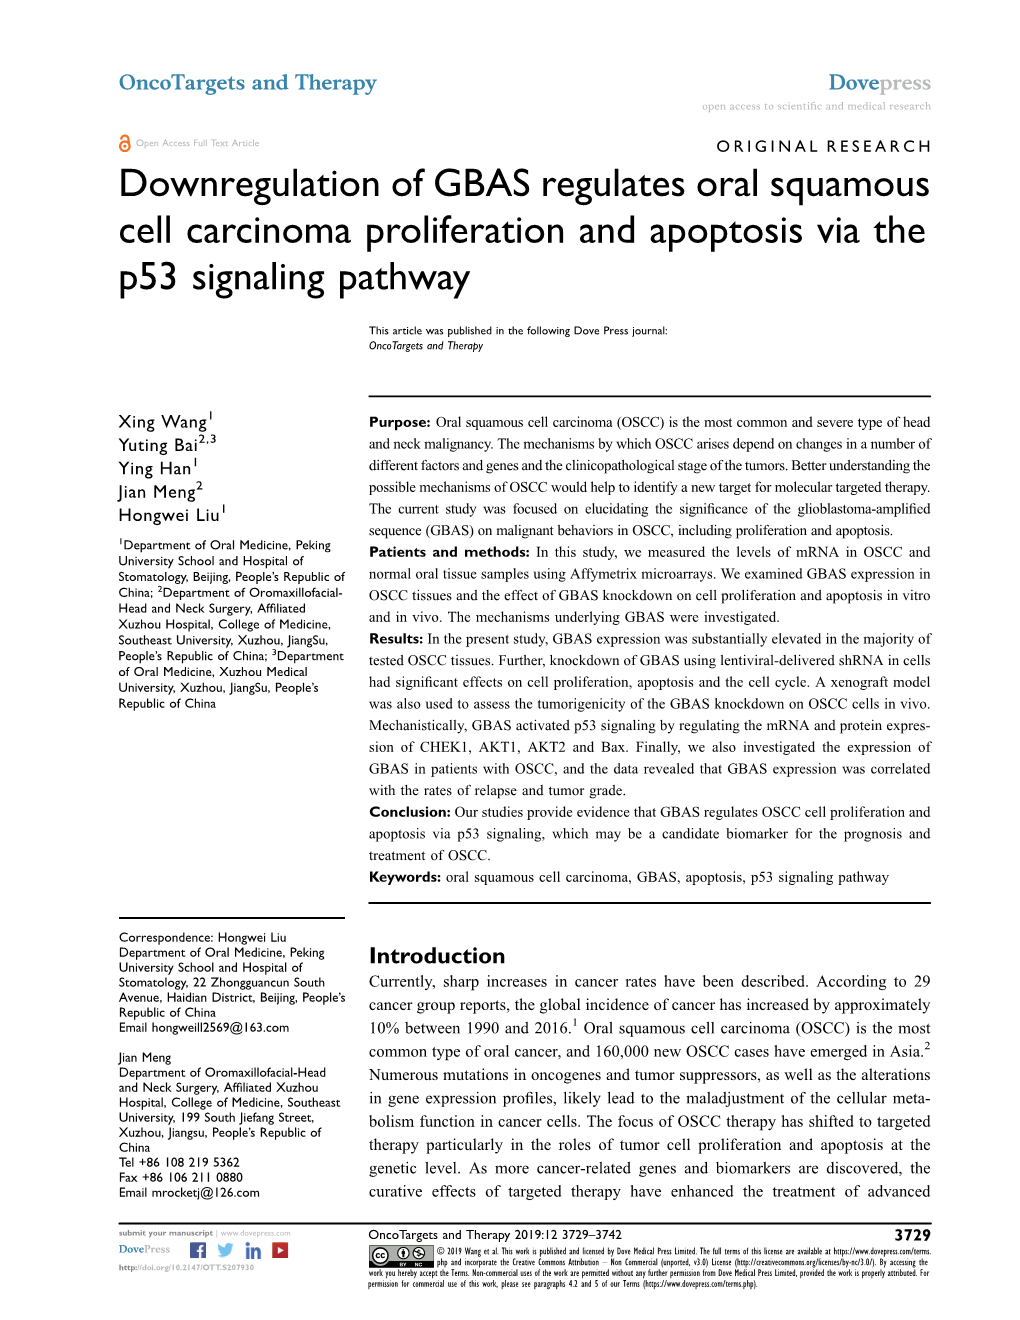 Downregulation of GBAS Regulates Oral Squamous Cell Carcinoma Proliferation and Apoptosis Via the P53 Signaling Pathway